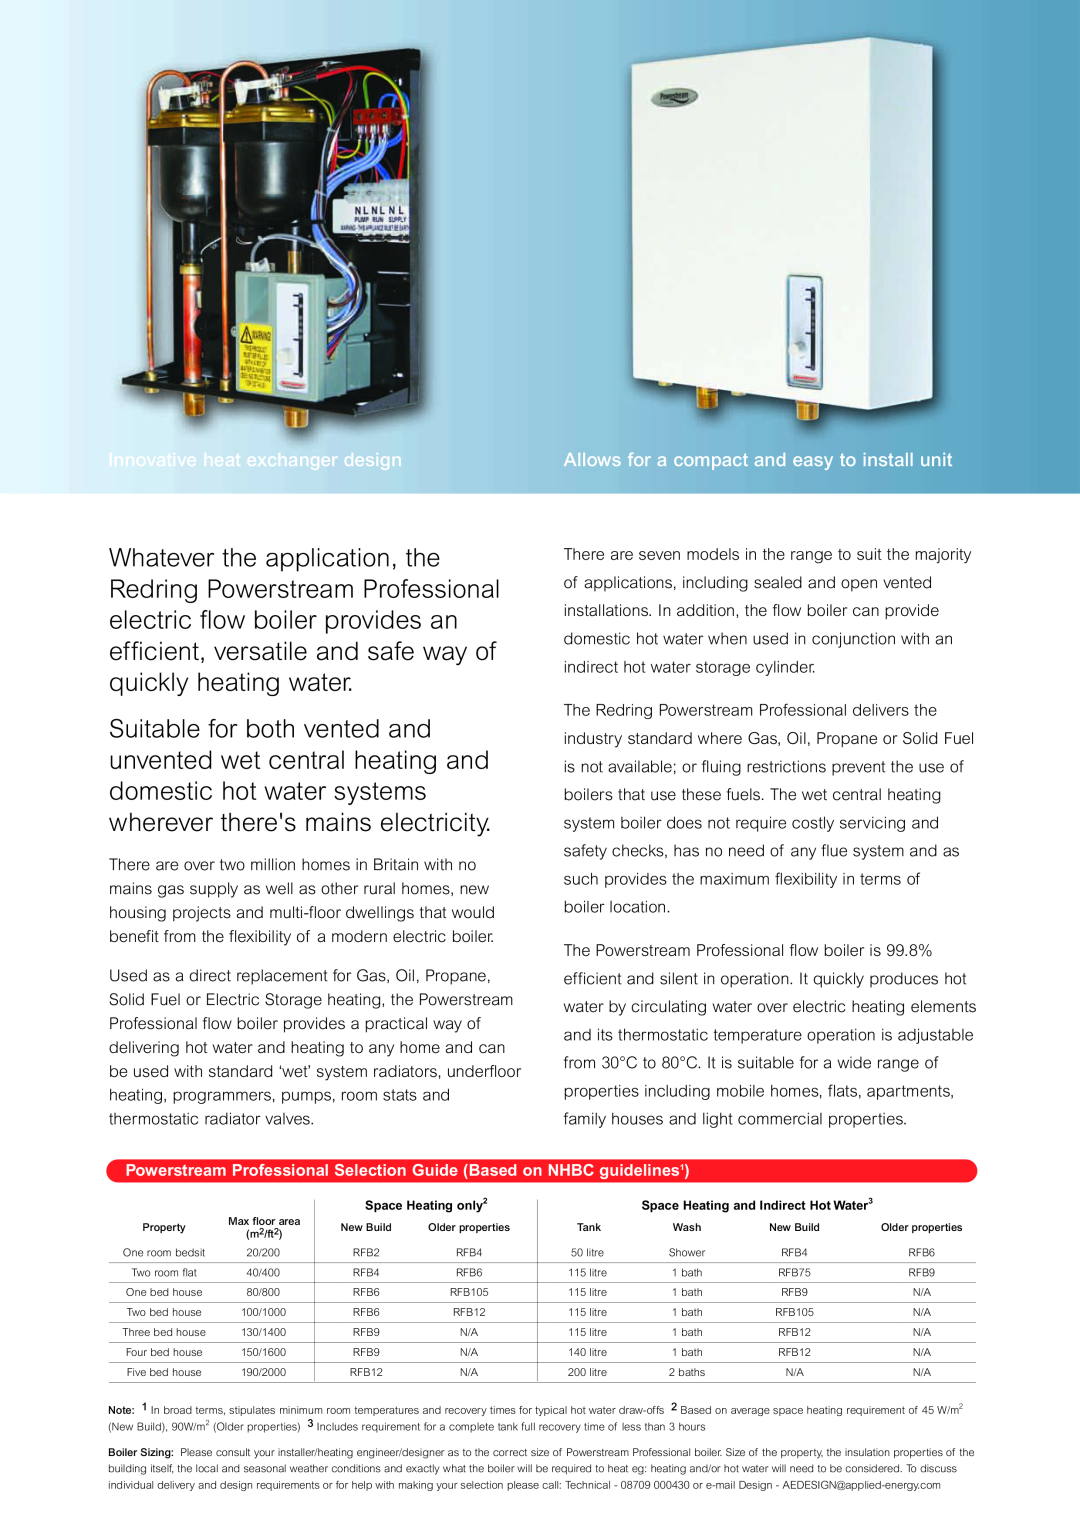 Signat Powerstream Professional manual Innovative heat exchanger design, Allows for a compact and easy to install unit 